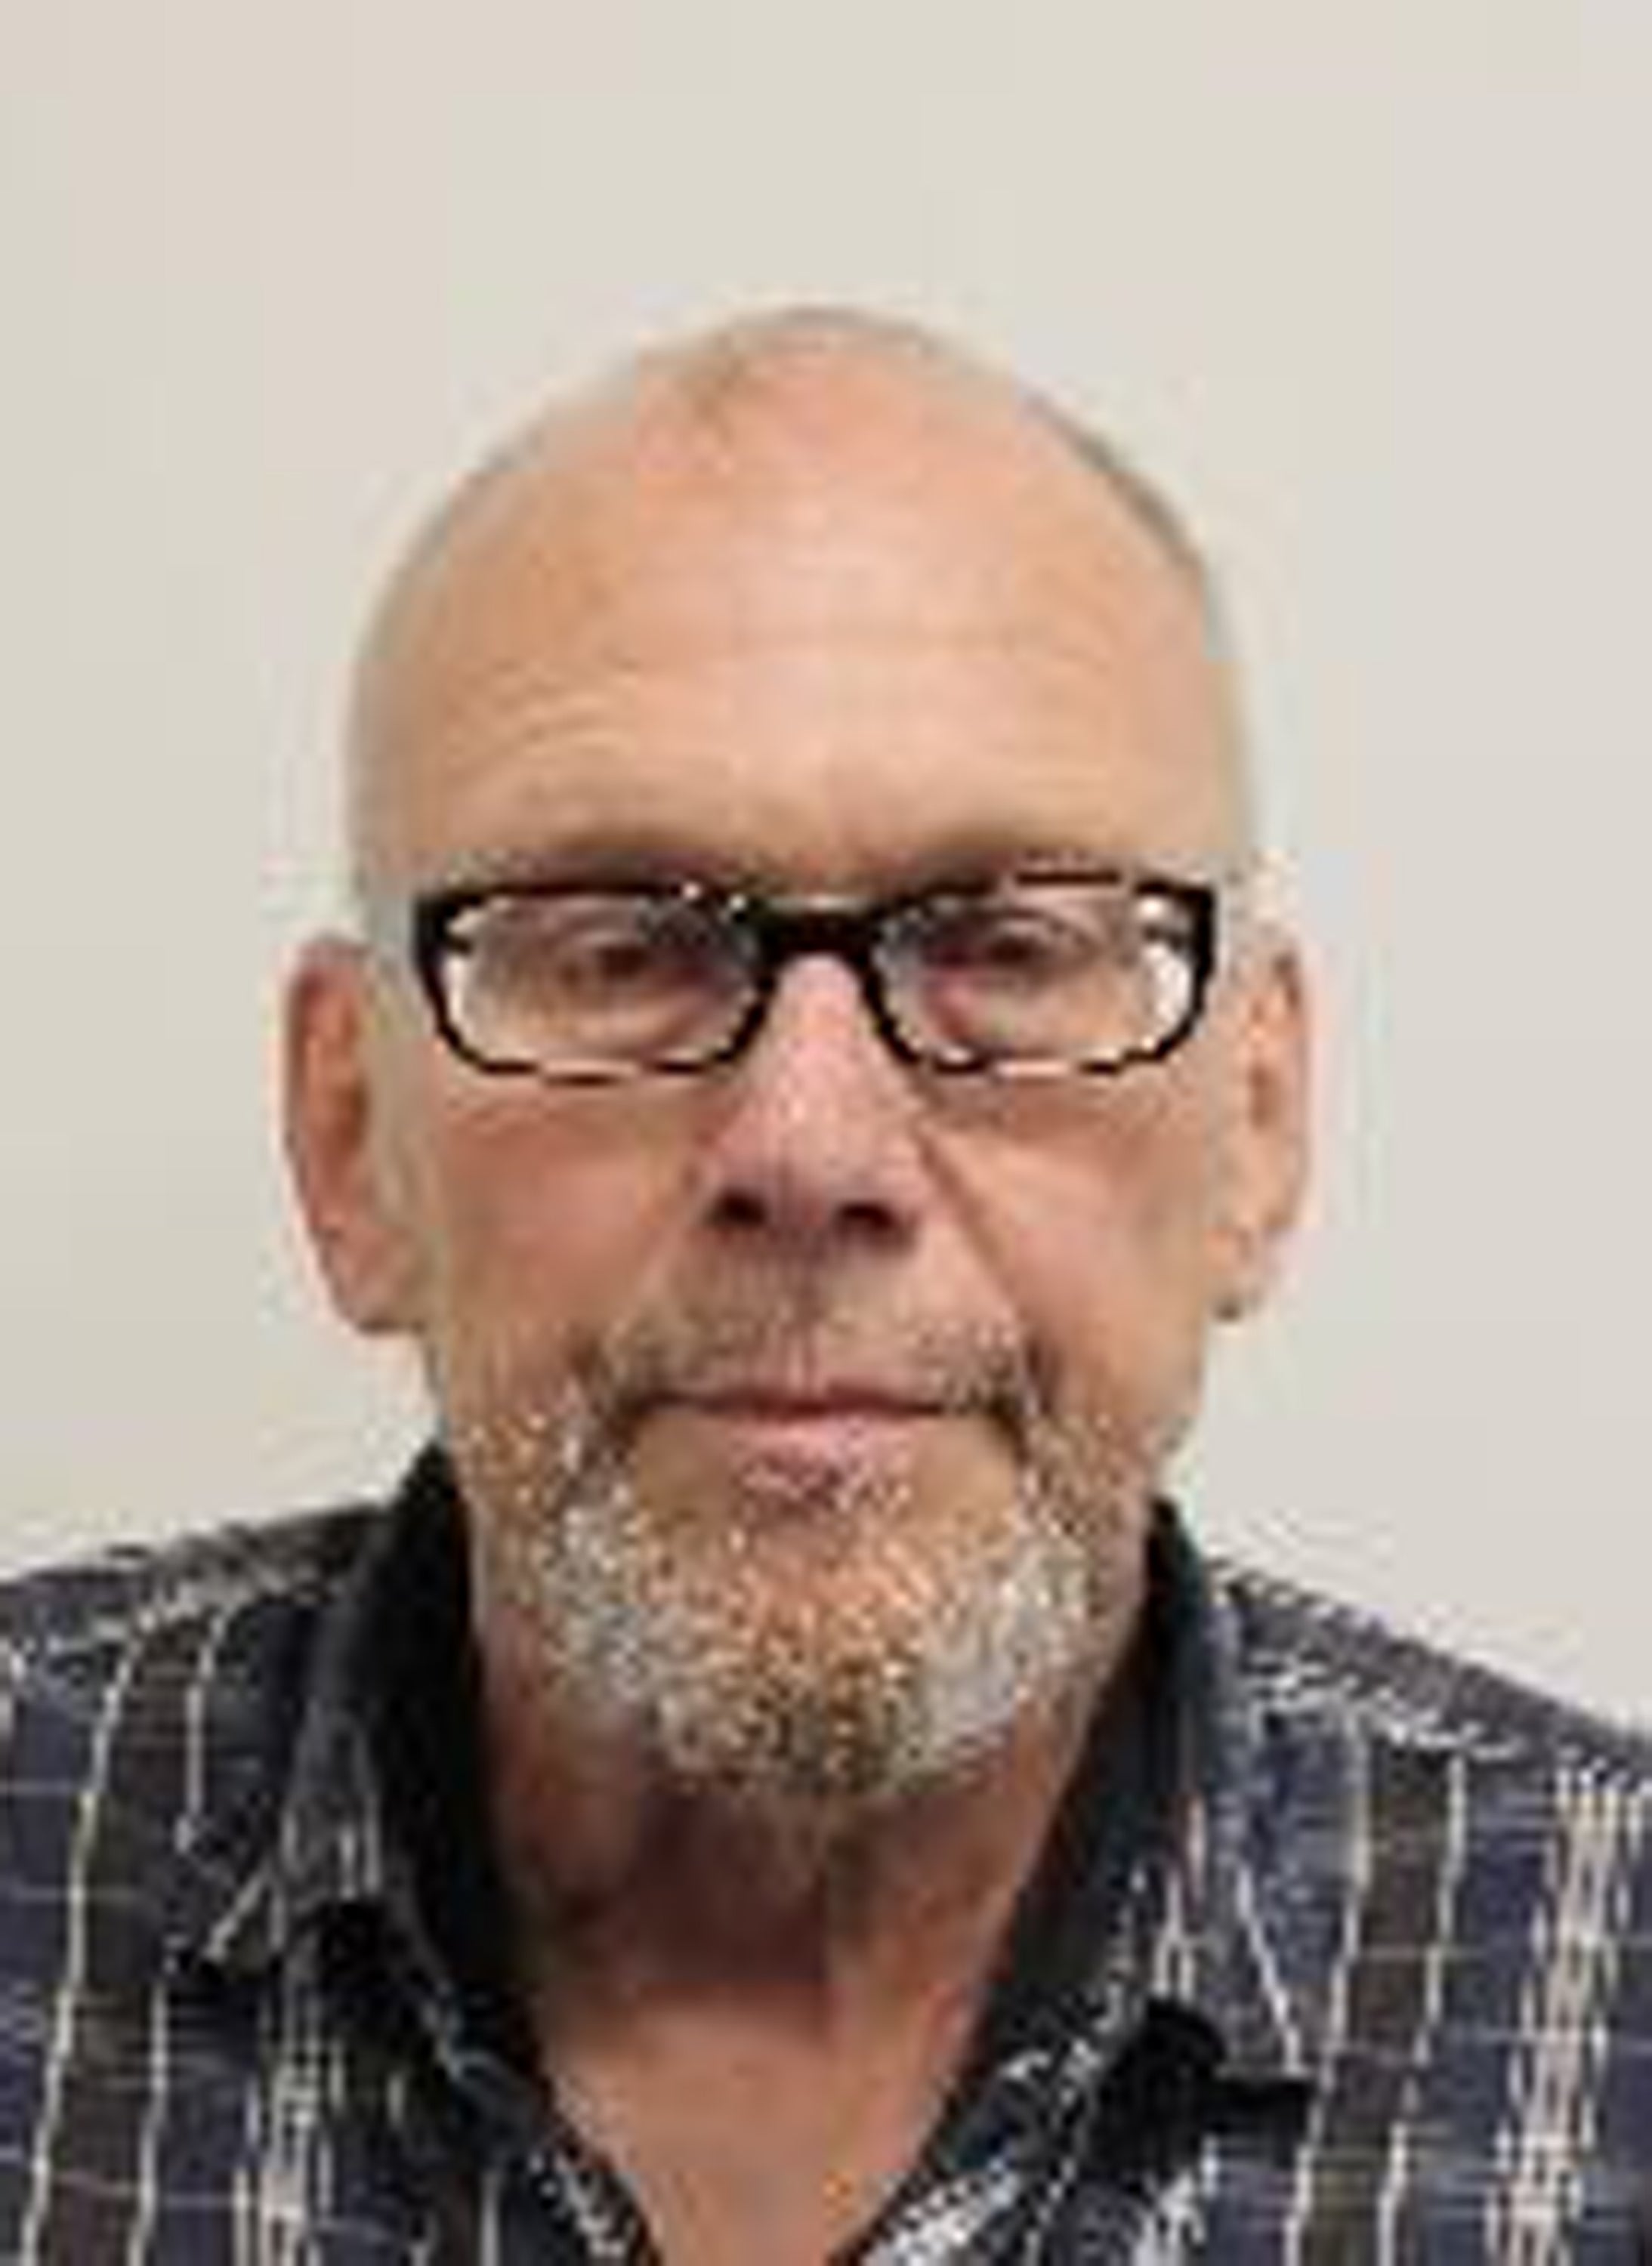 Stefan Scharf, 61, of no fixed address, was sentenced to four years and six months in jail